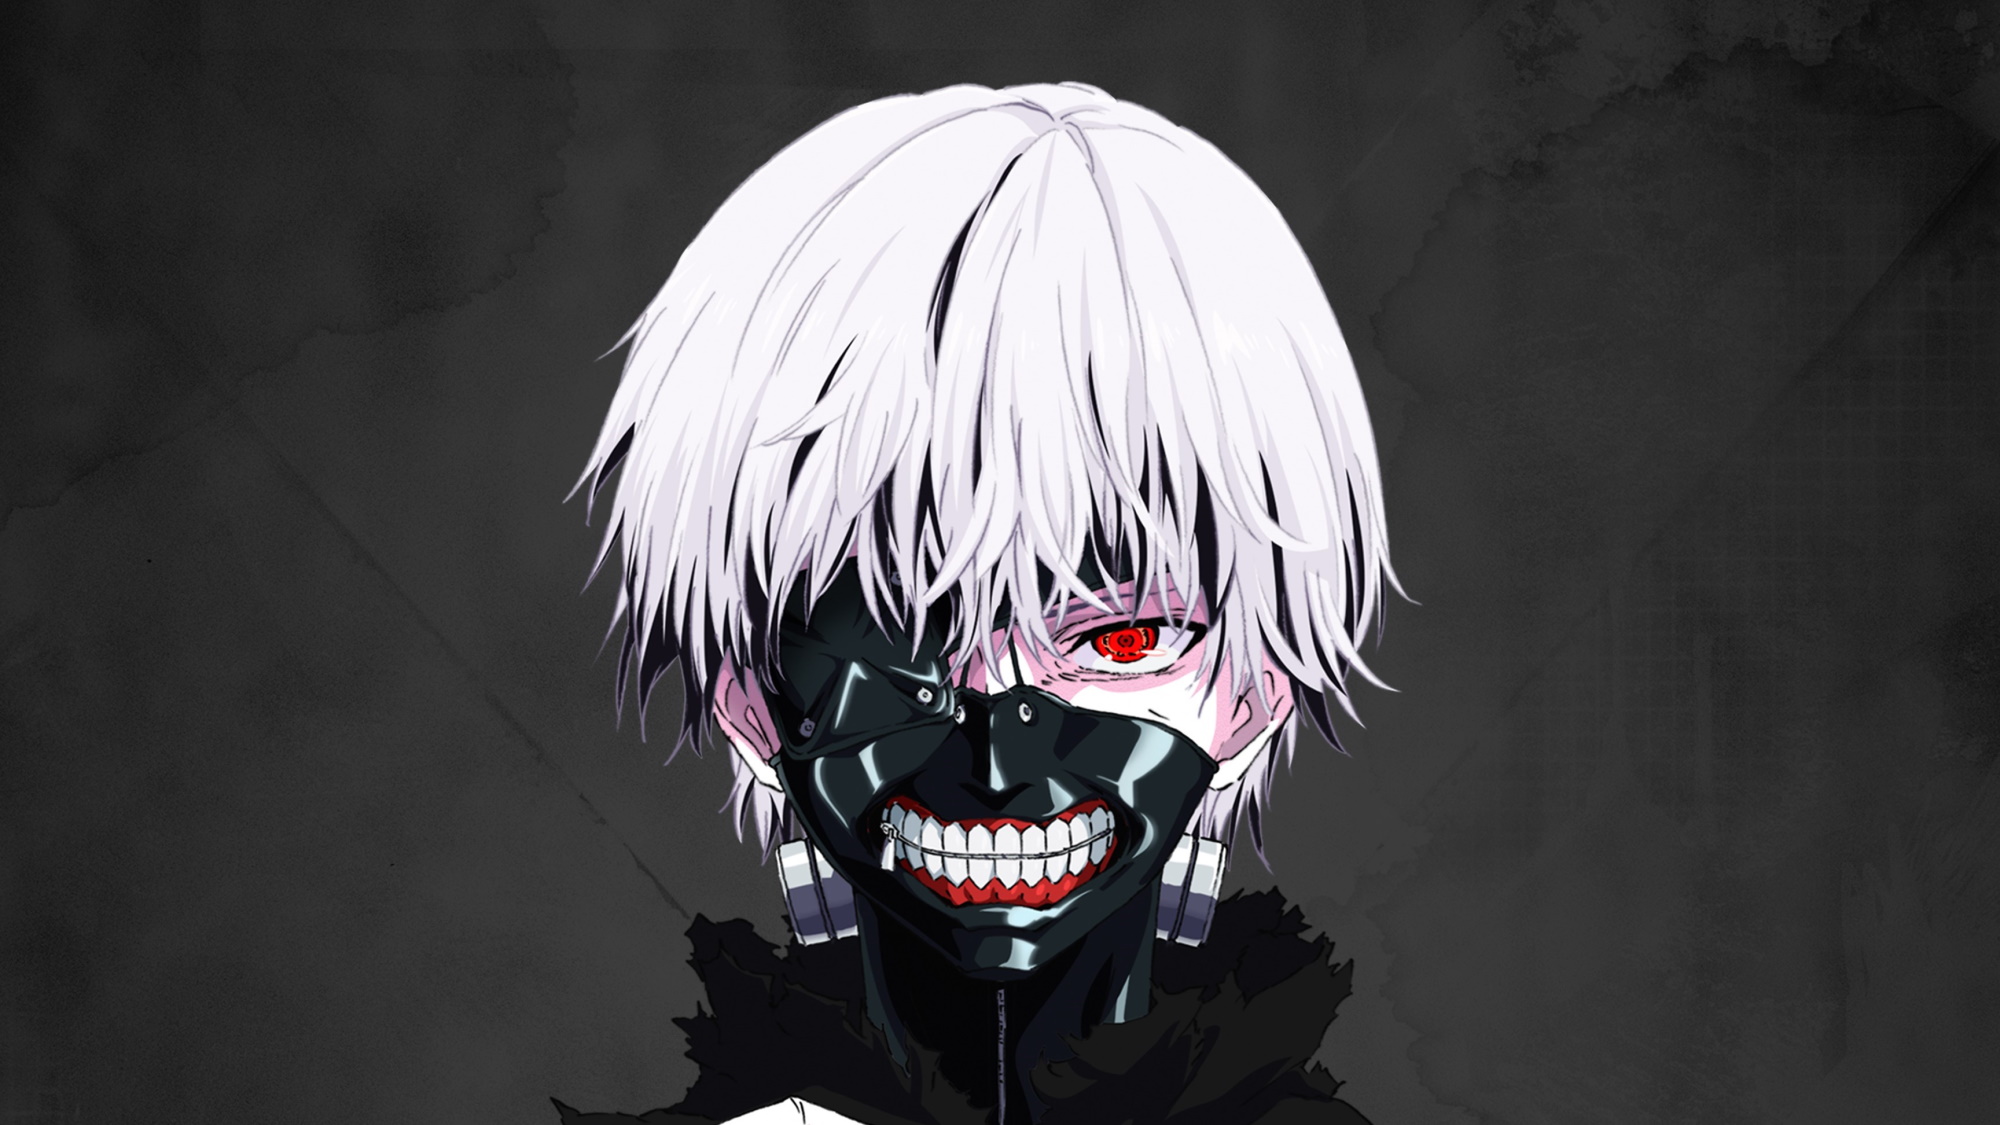 Watch Tokyo Ghoul (Live-Action) - Crunchyroll